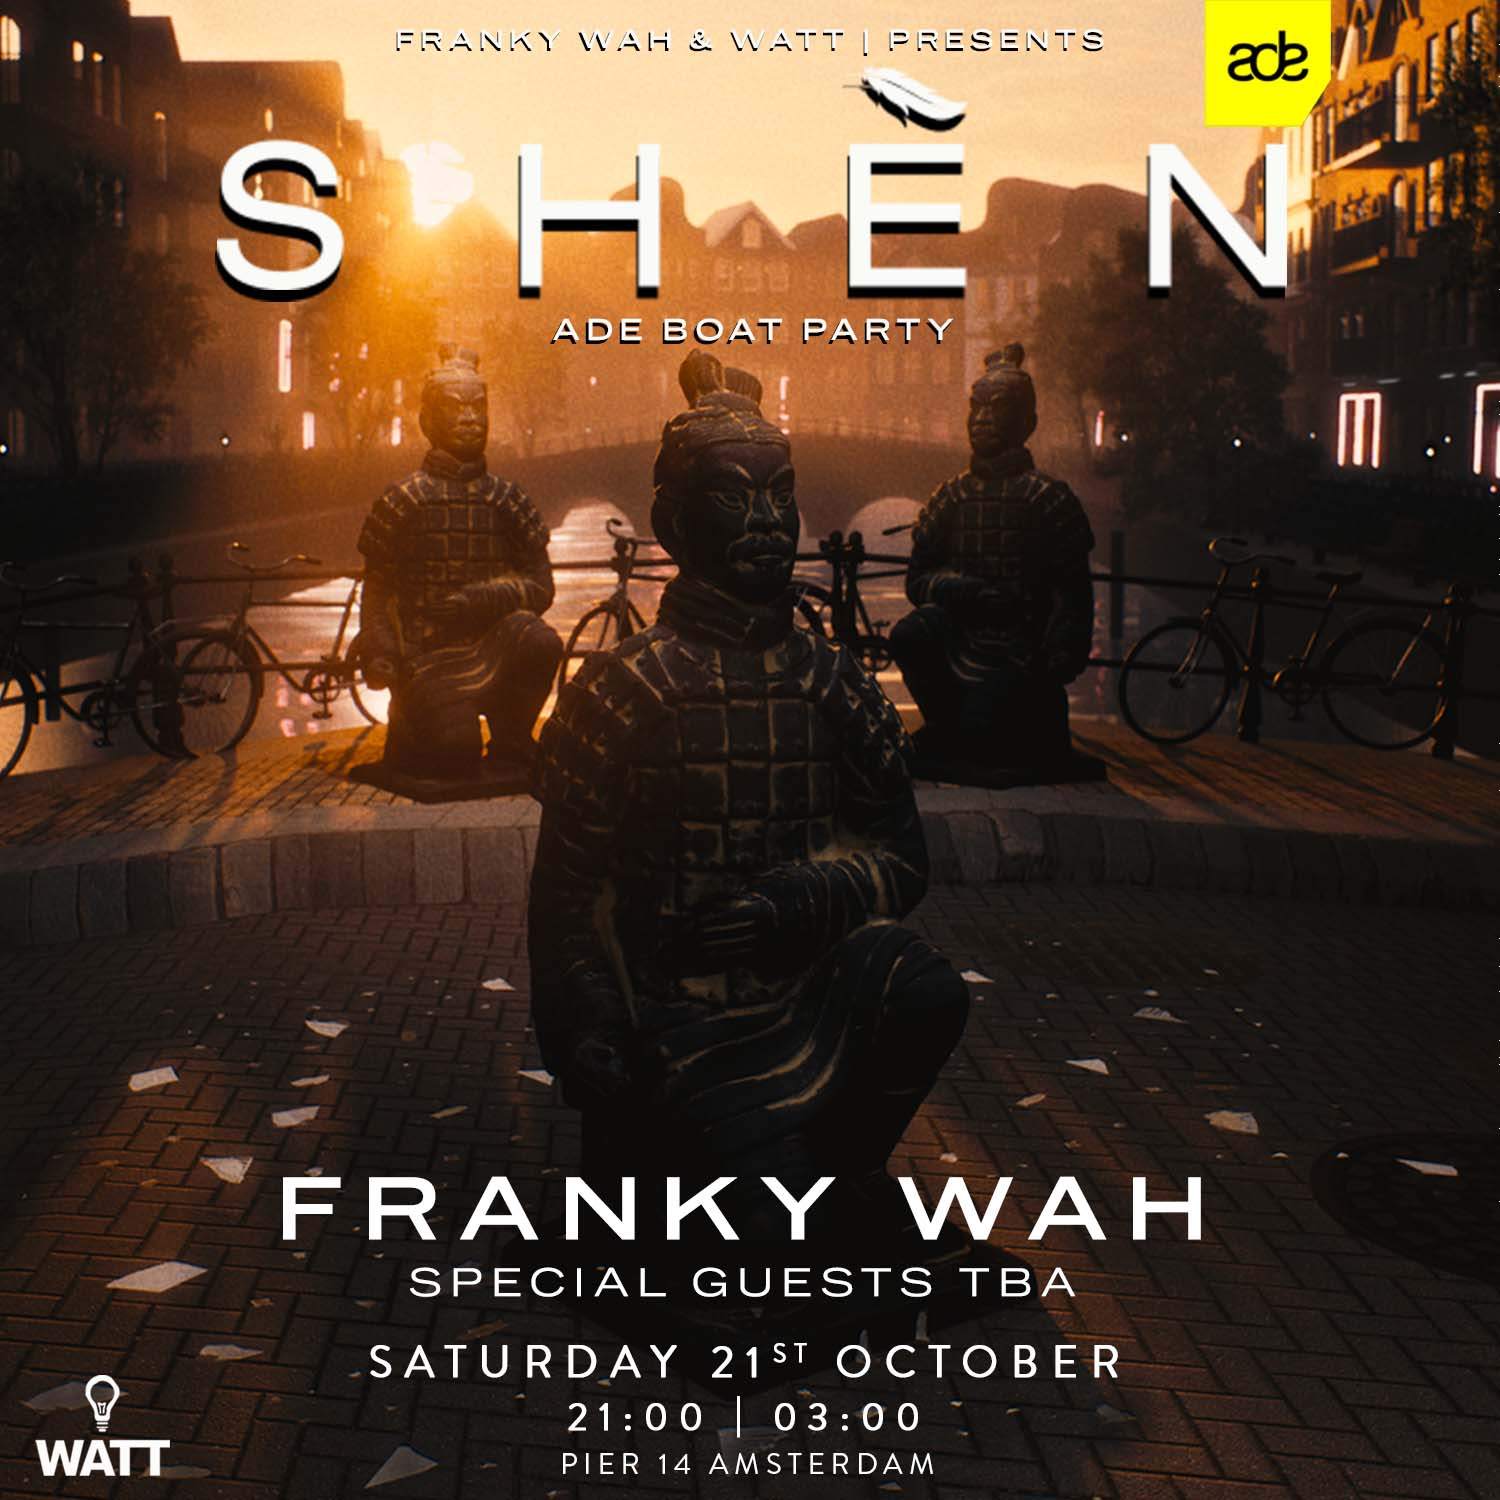 Franky Wah presents Shèn ADE boatparty - フライヤー表